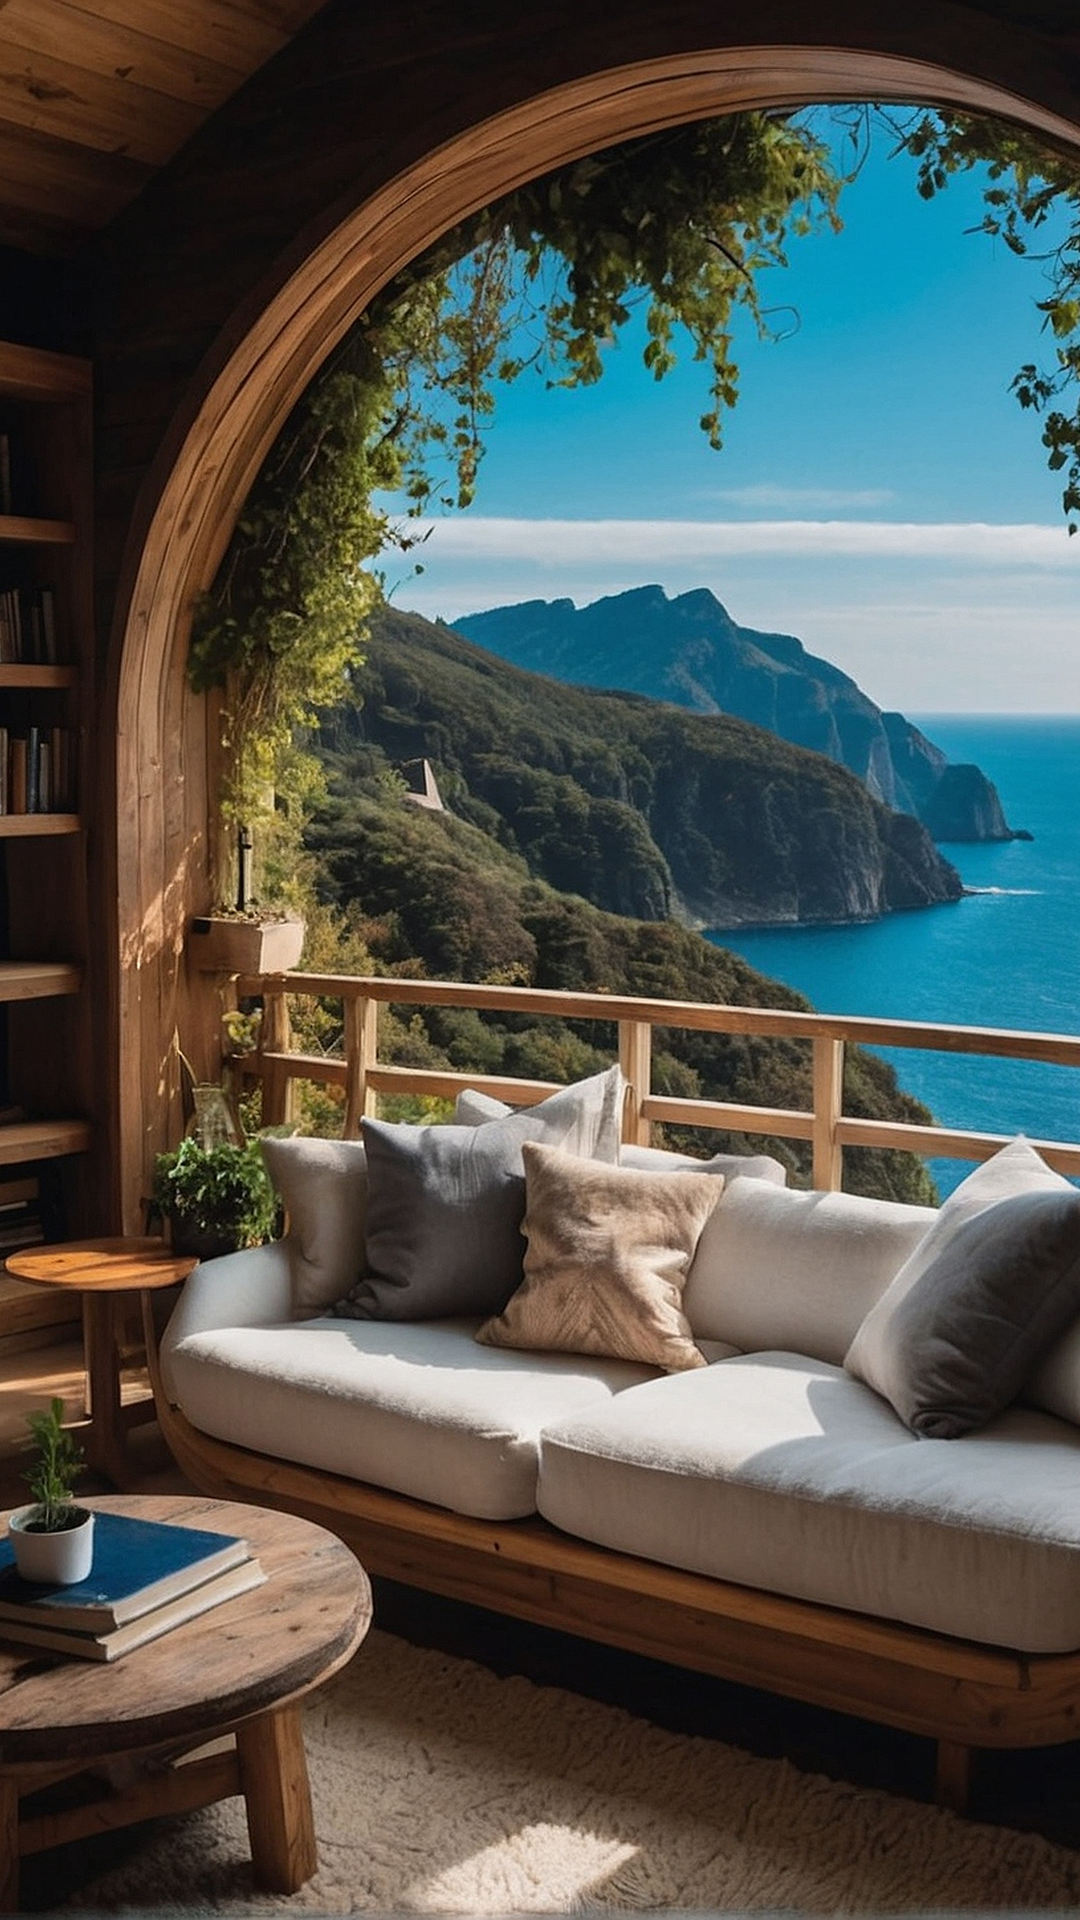 Picturesque Reading Spots for Home